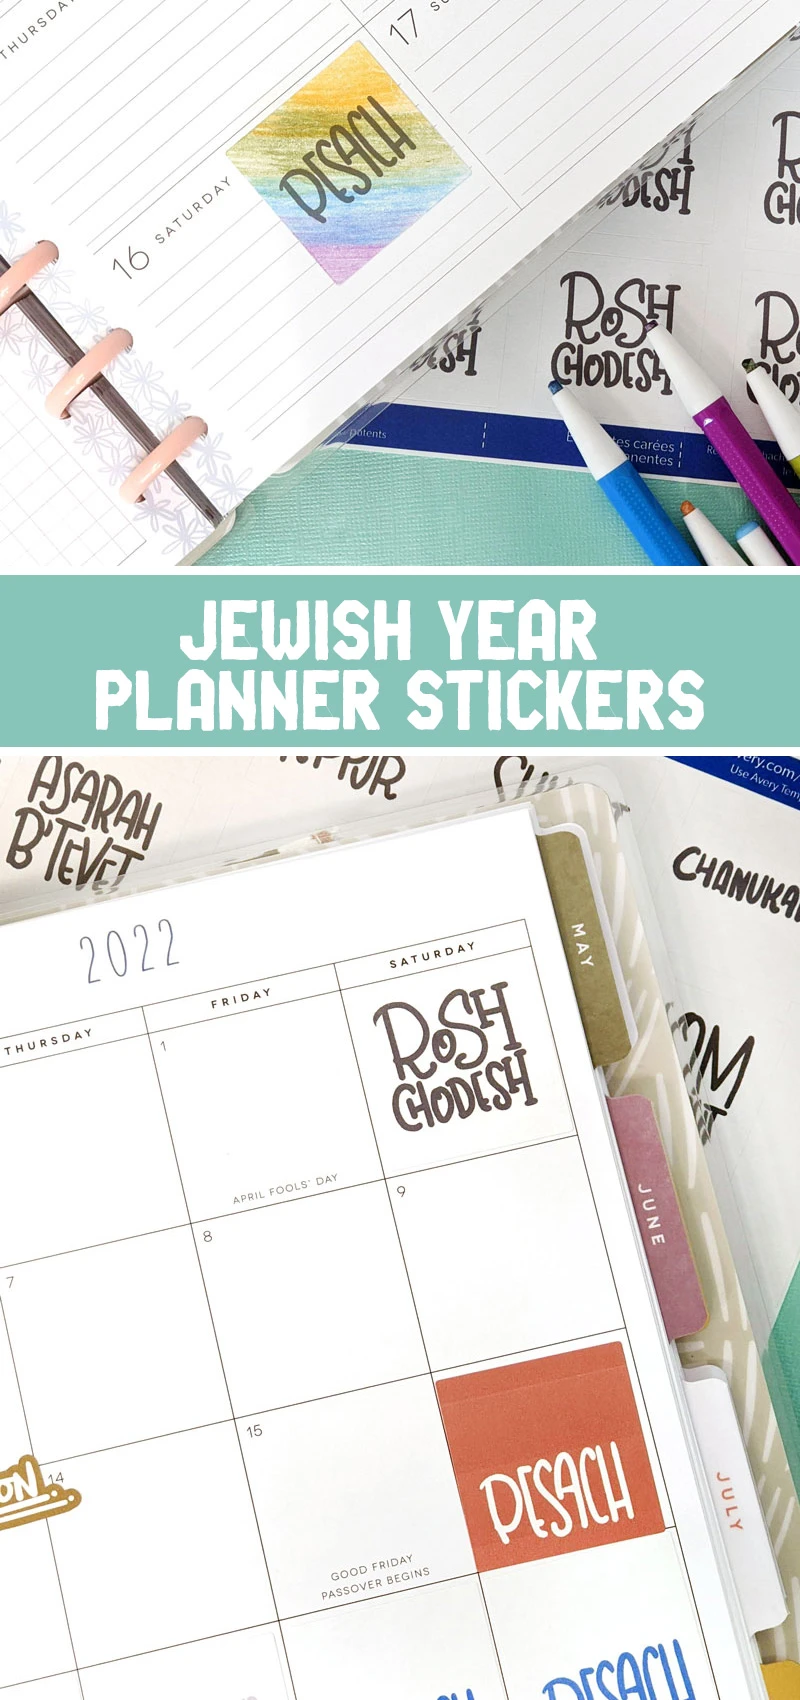 Enjoy these Jewish holiday stickers - perfect for planners and calendars, including a free printable!